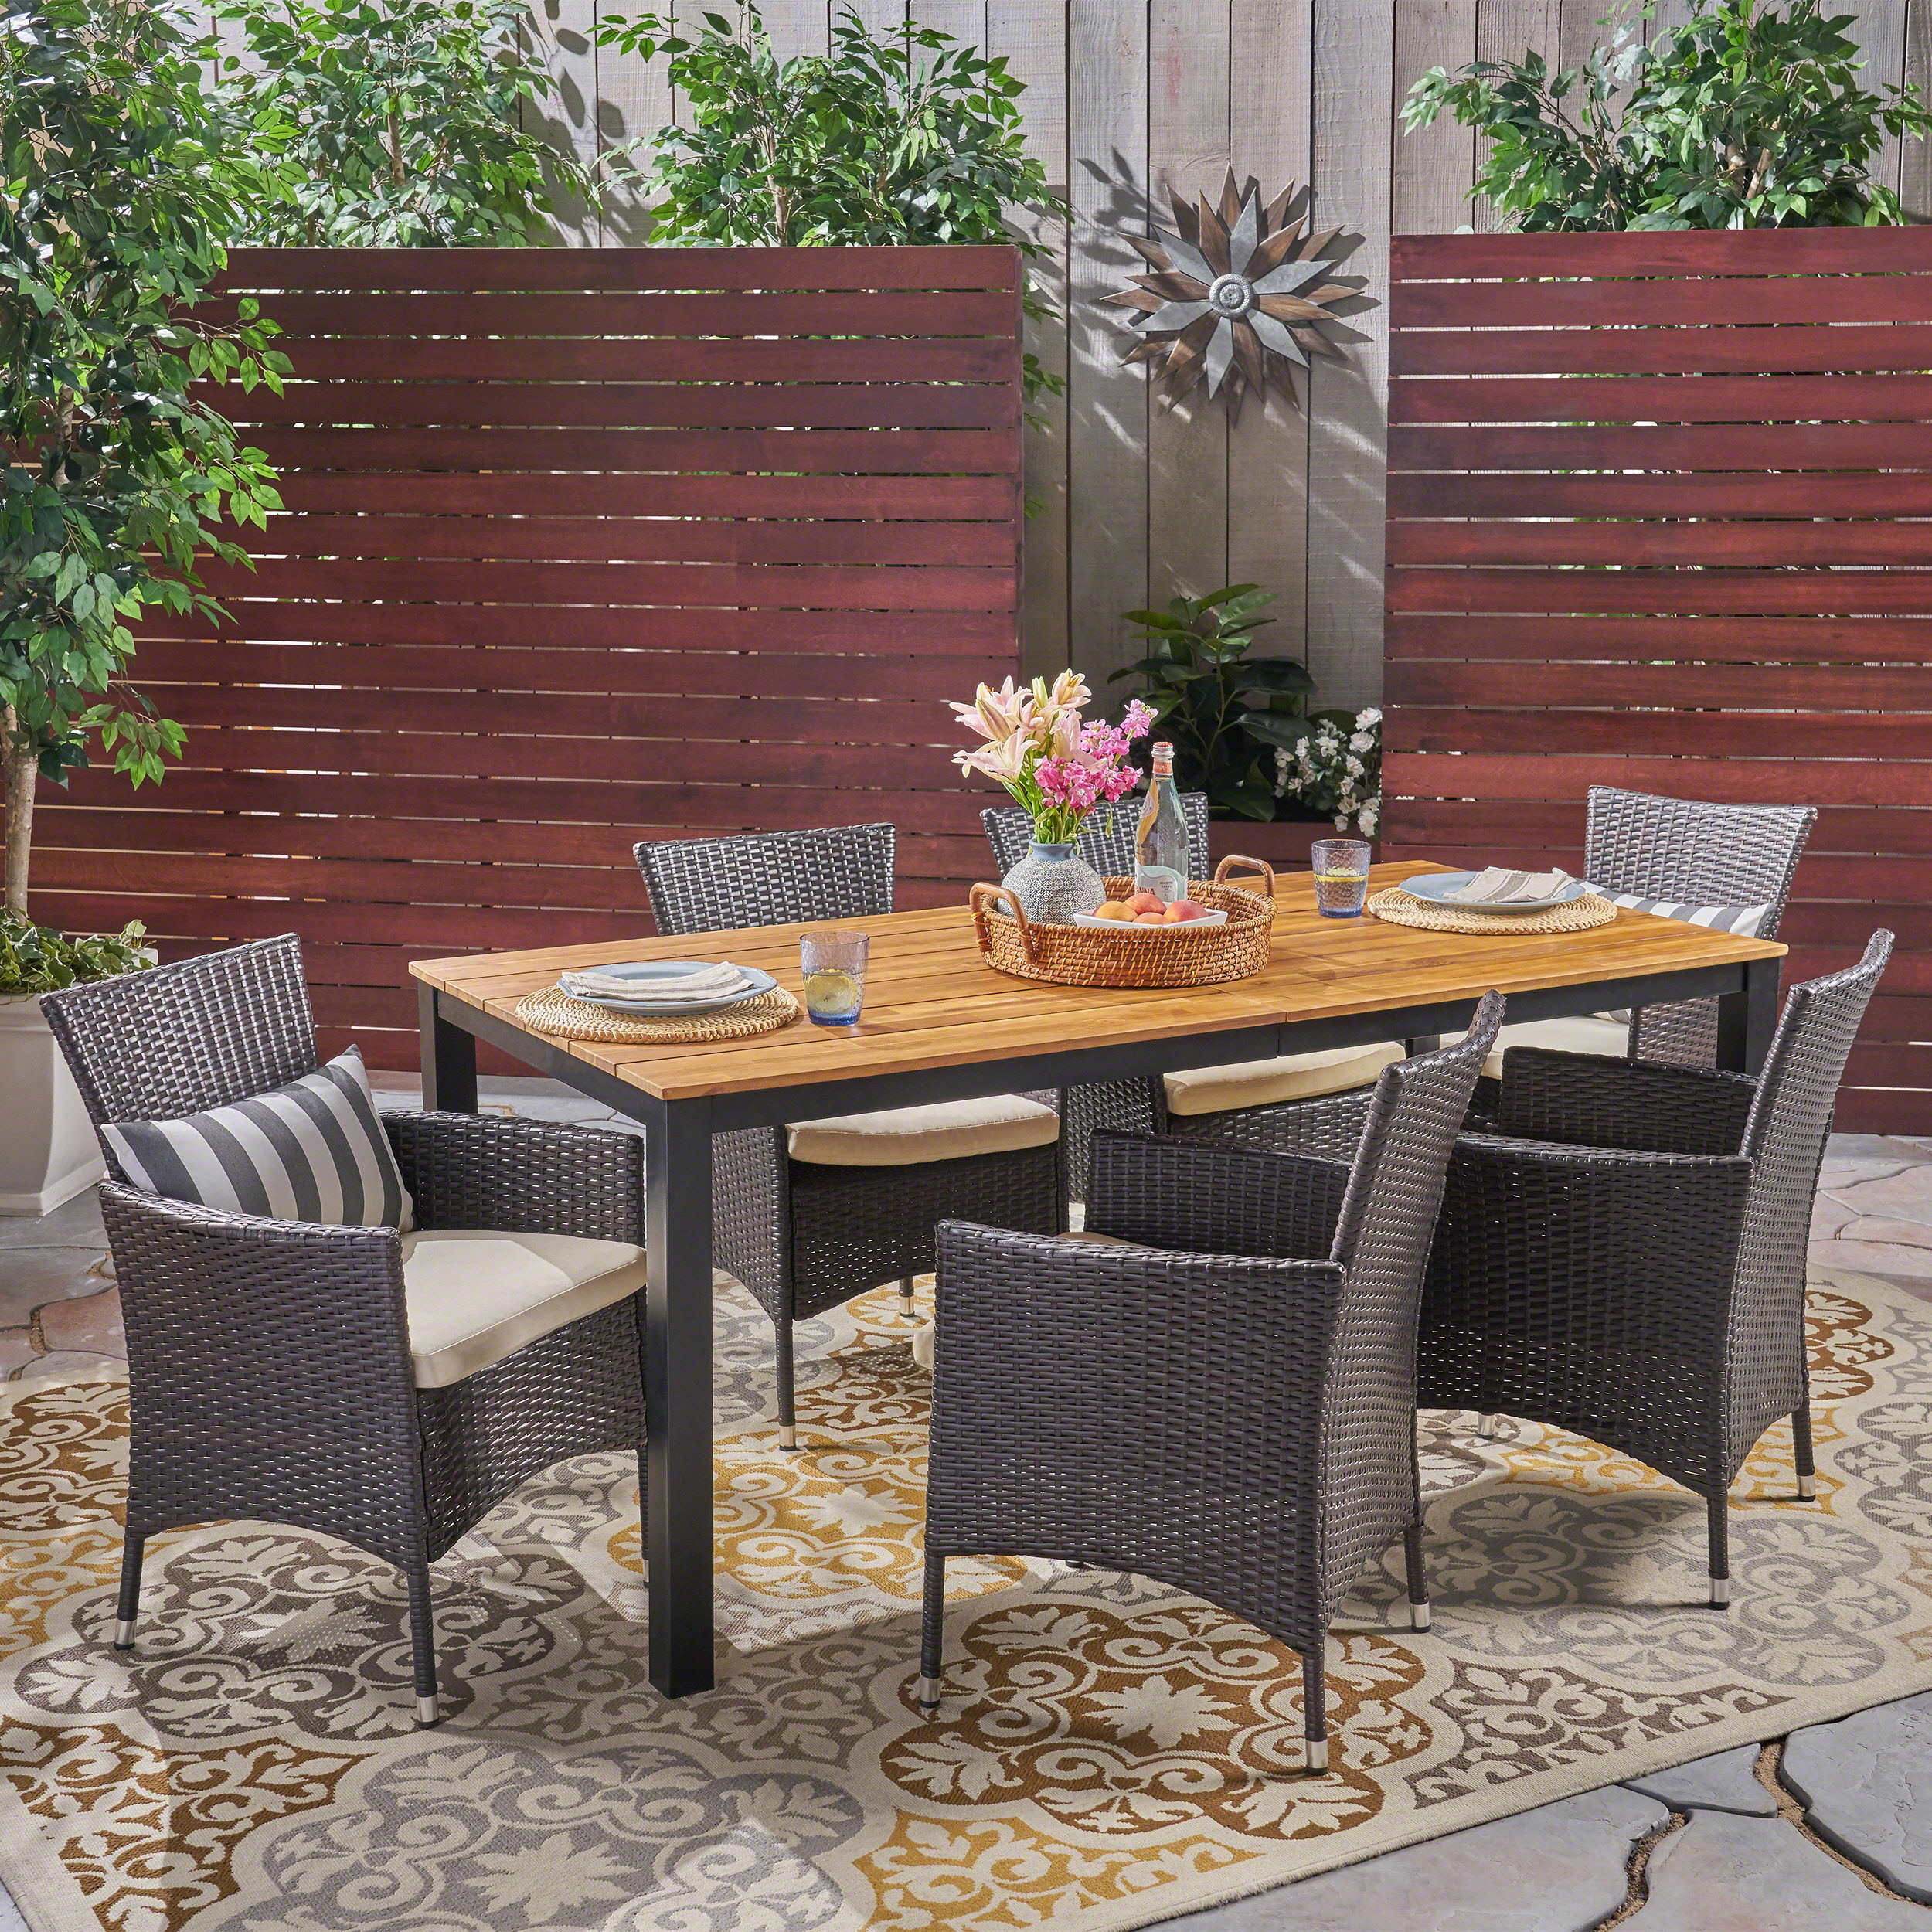 Vienna Outdoor 7 Piece Acacia Wood Dining Set with Wicker Chairs and Cushions, Multi Brown, Teak, Beige - image 1 of 7